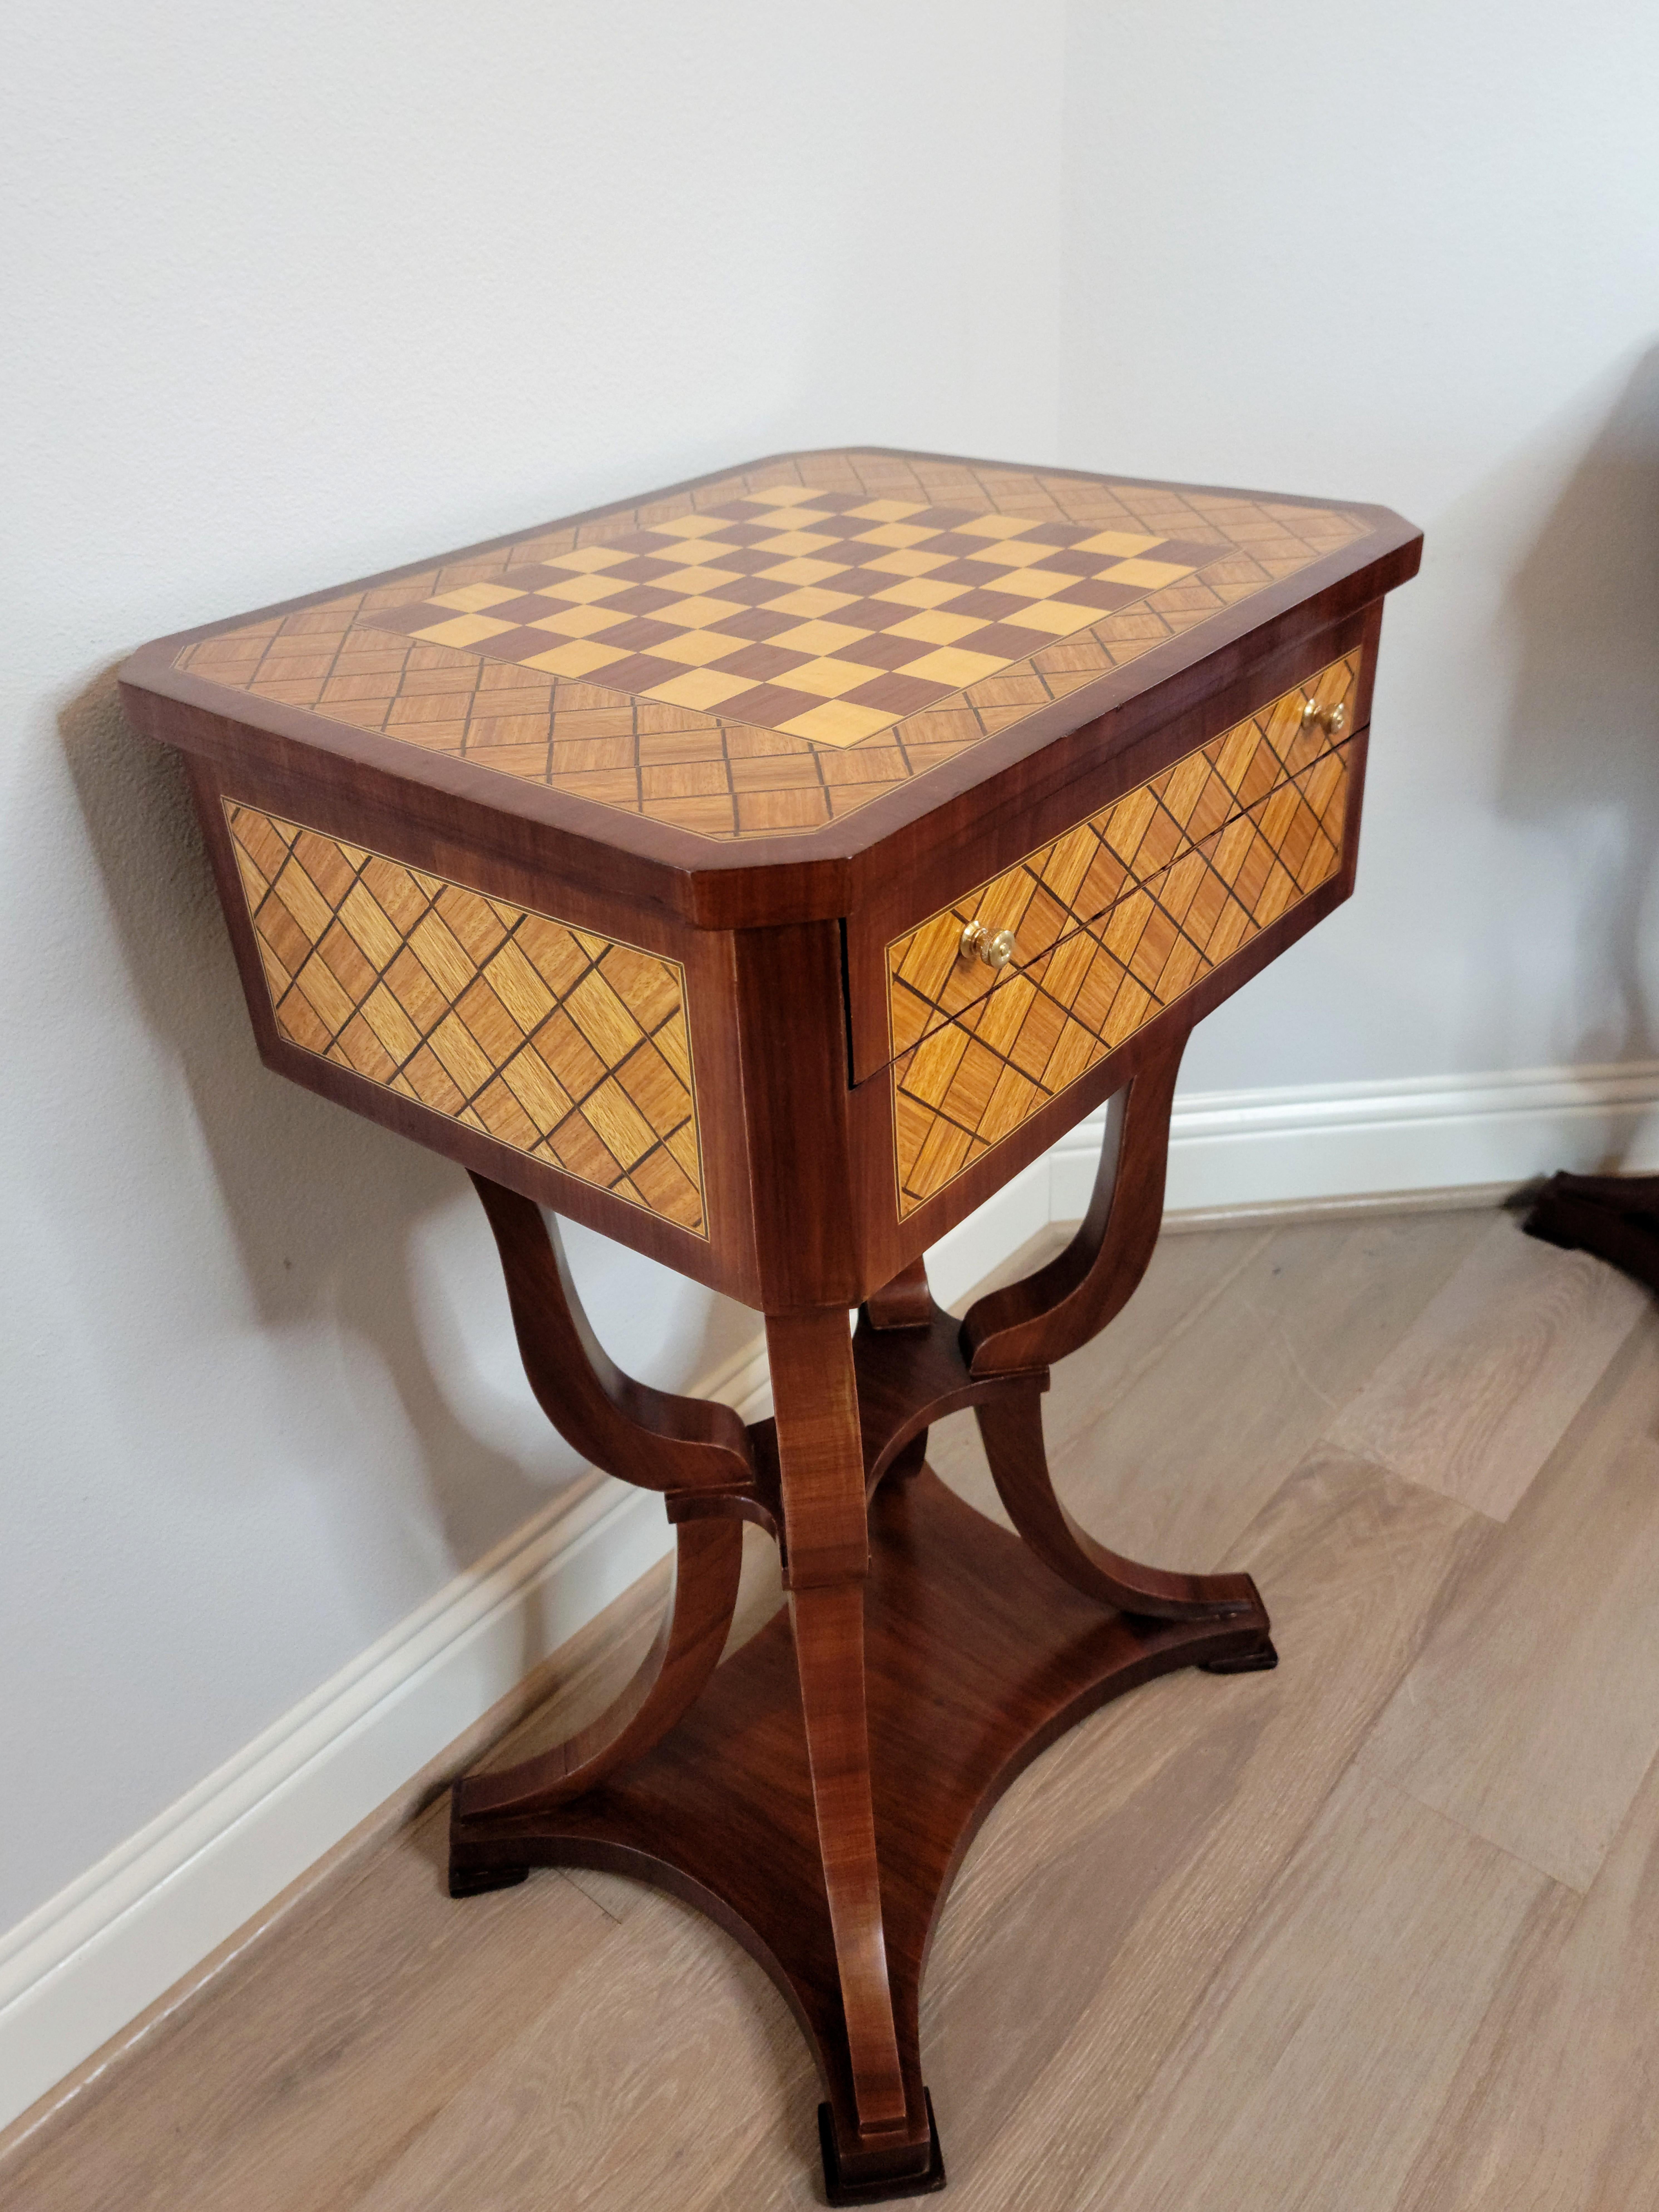 Pair of Italian Neoclassical Chessboard Parquetry Inlaid Tables For Sale 14